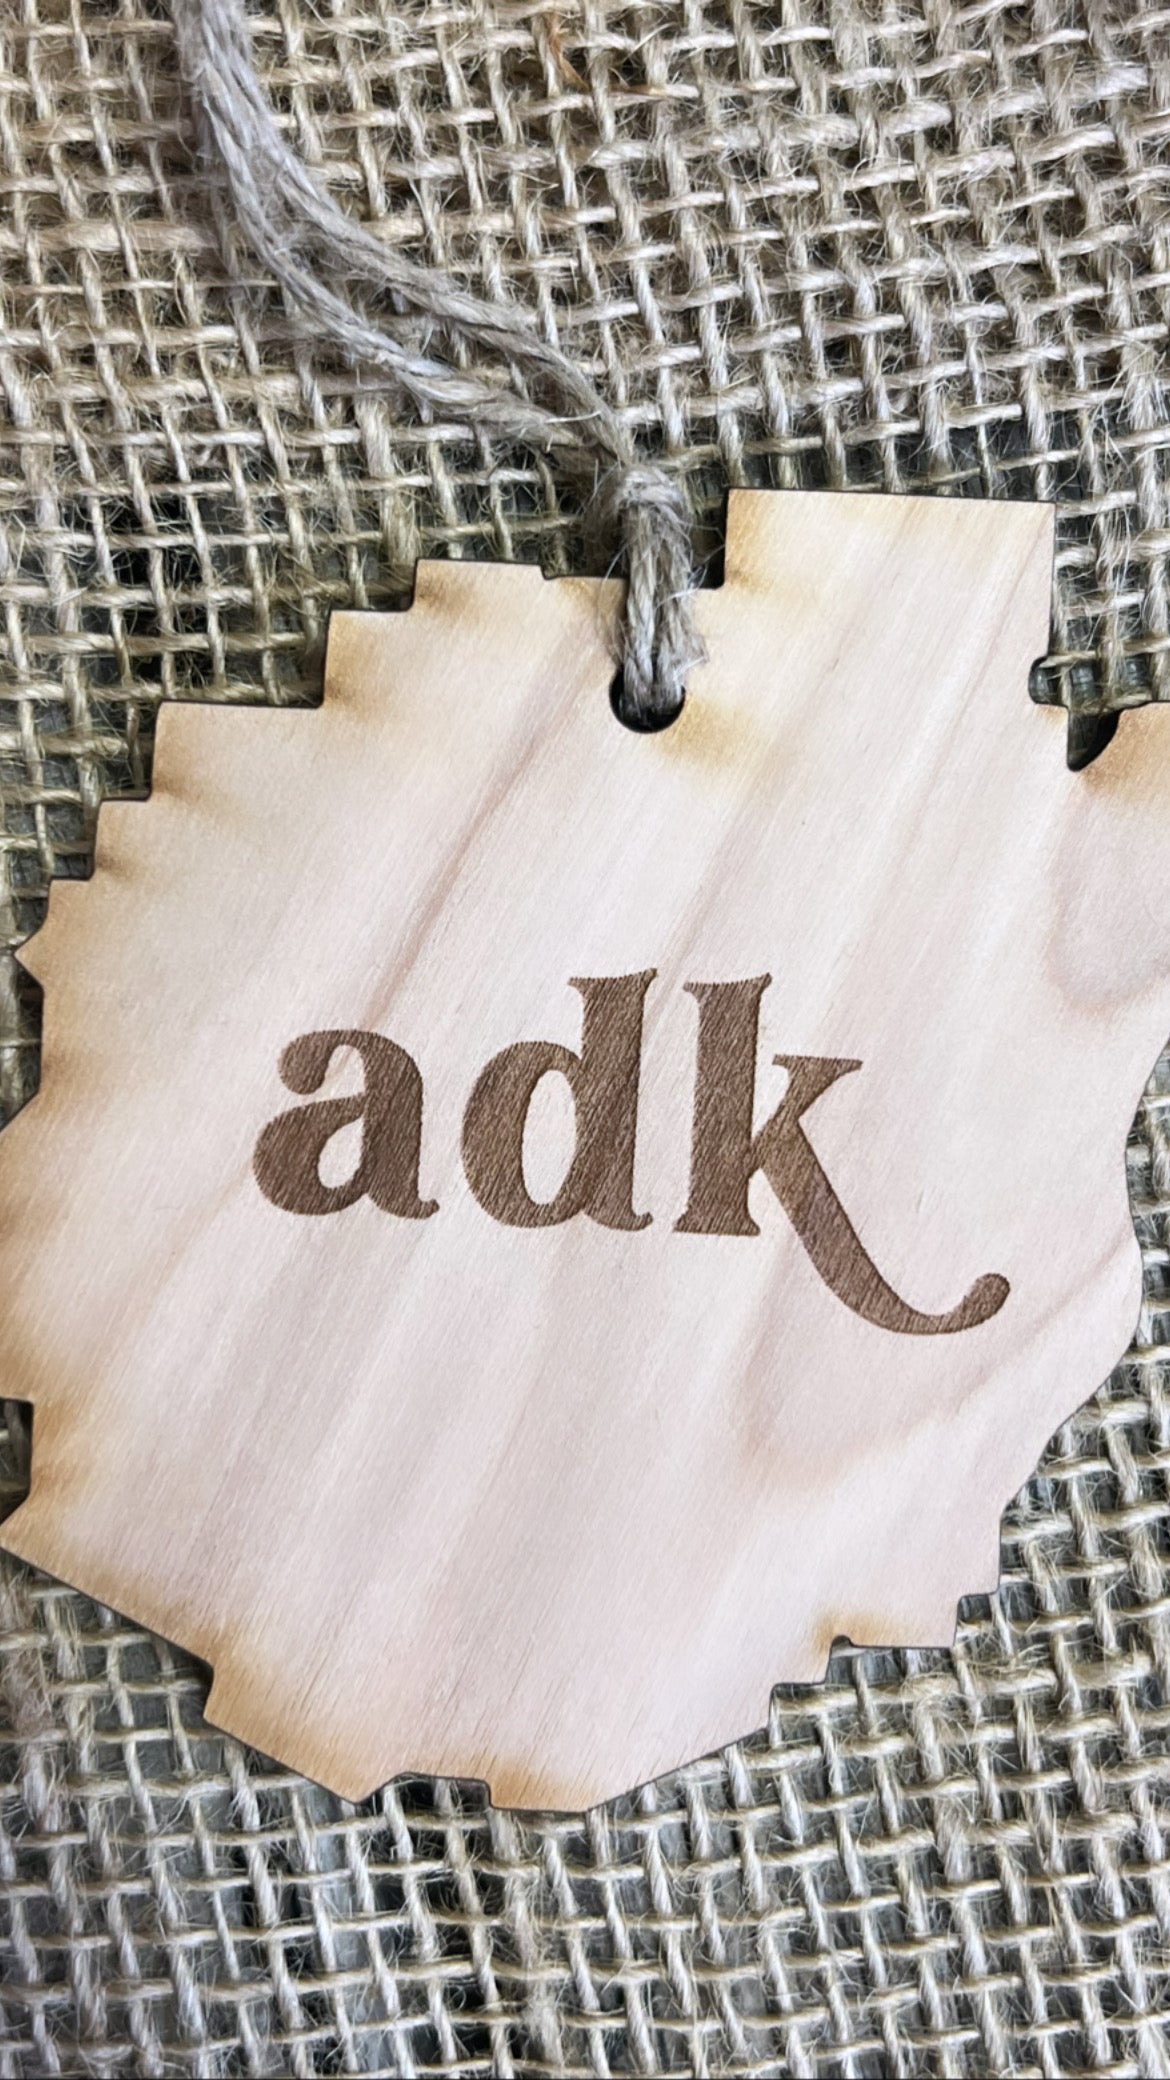 ADK Wooden Engraved Ornaments